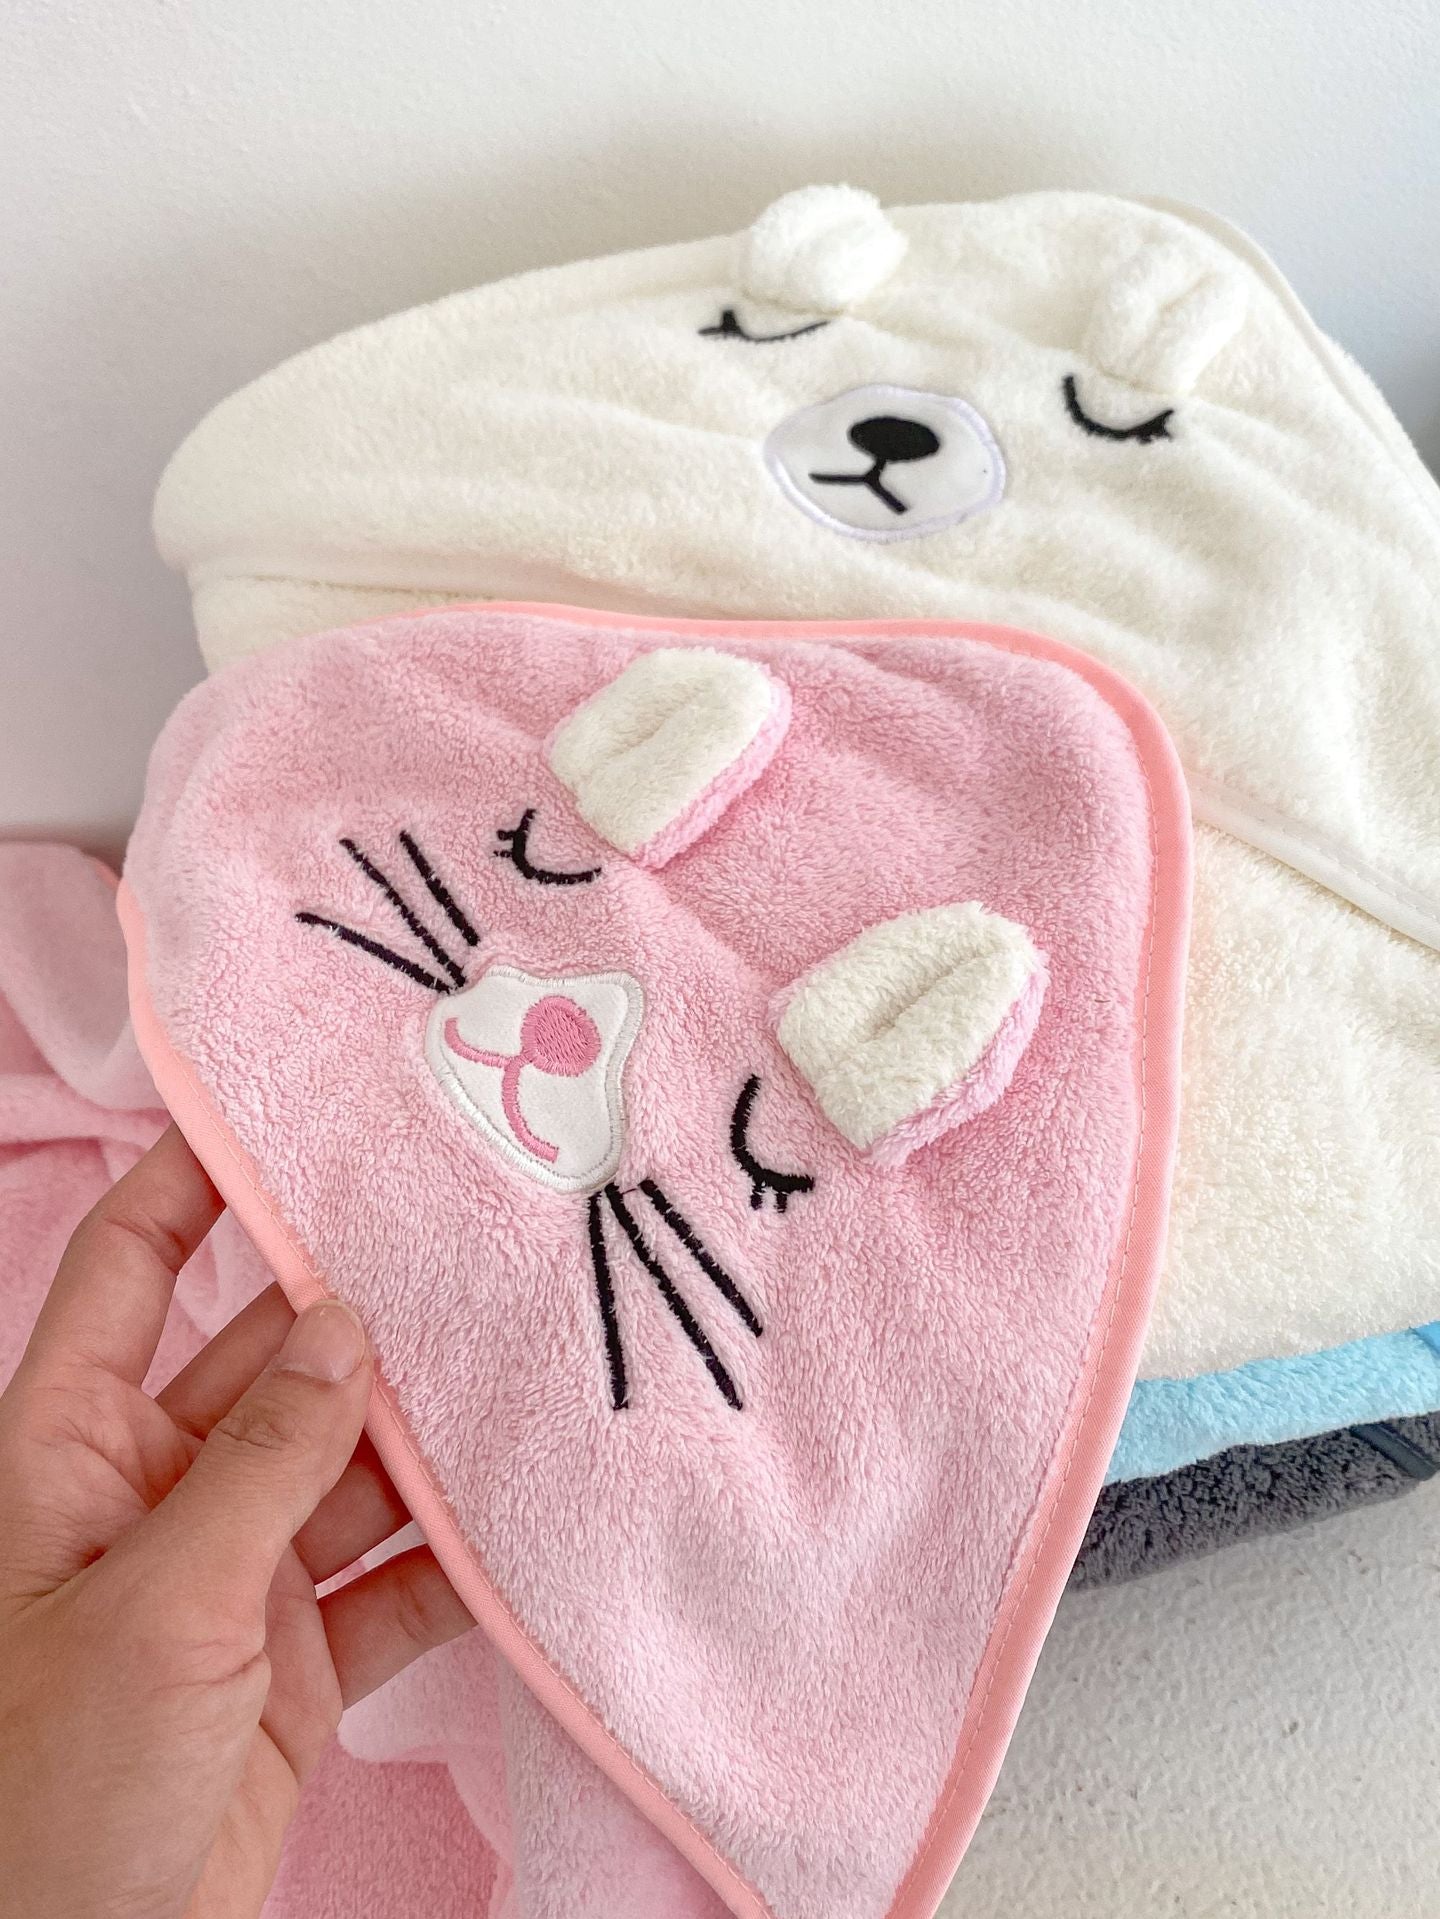 Quick-Drying Soft And Absorbent Baby And Toddler Bath Towel With Cute Hood